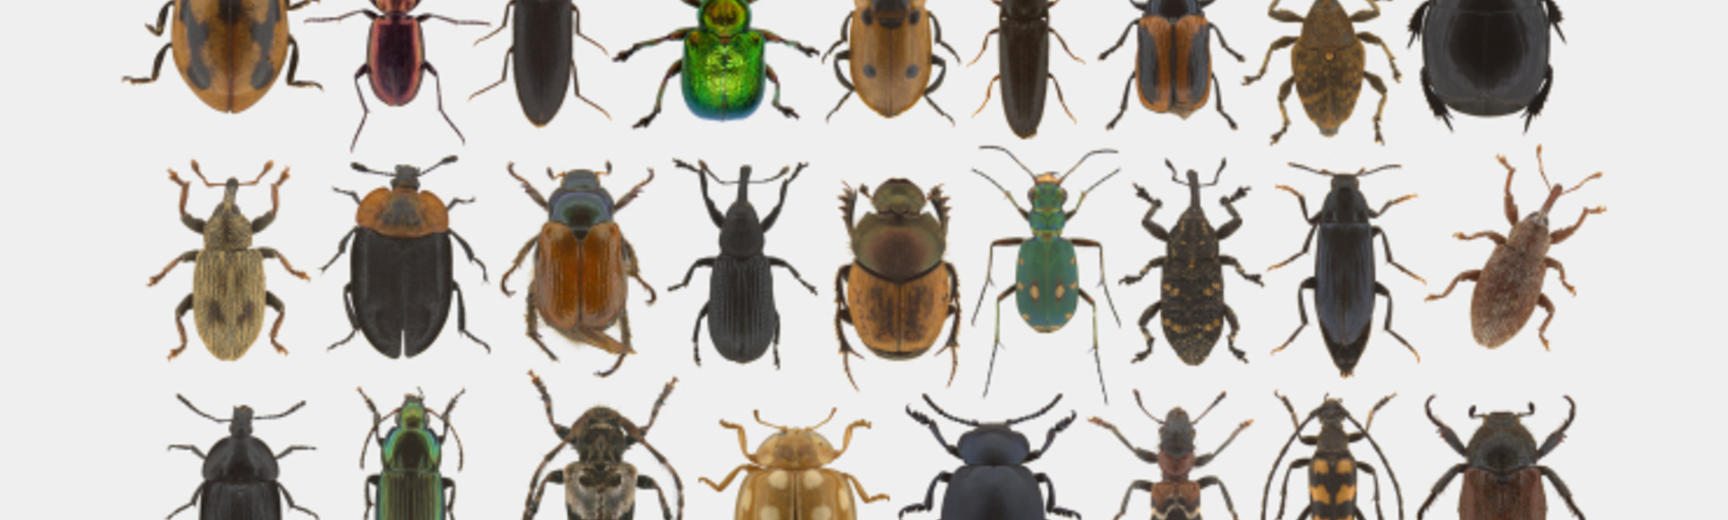 insects on white background